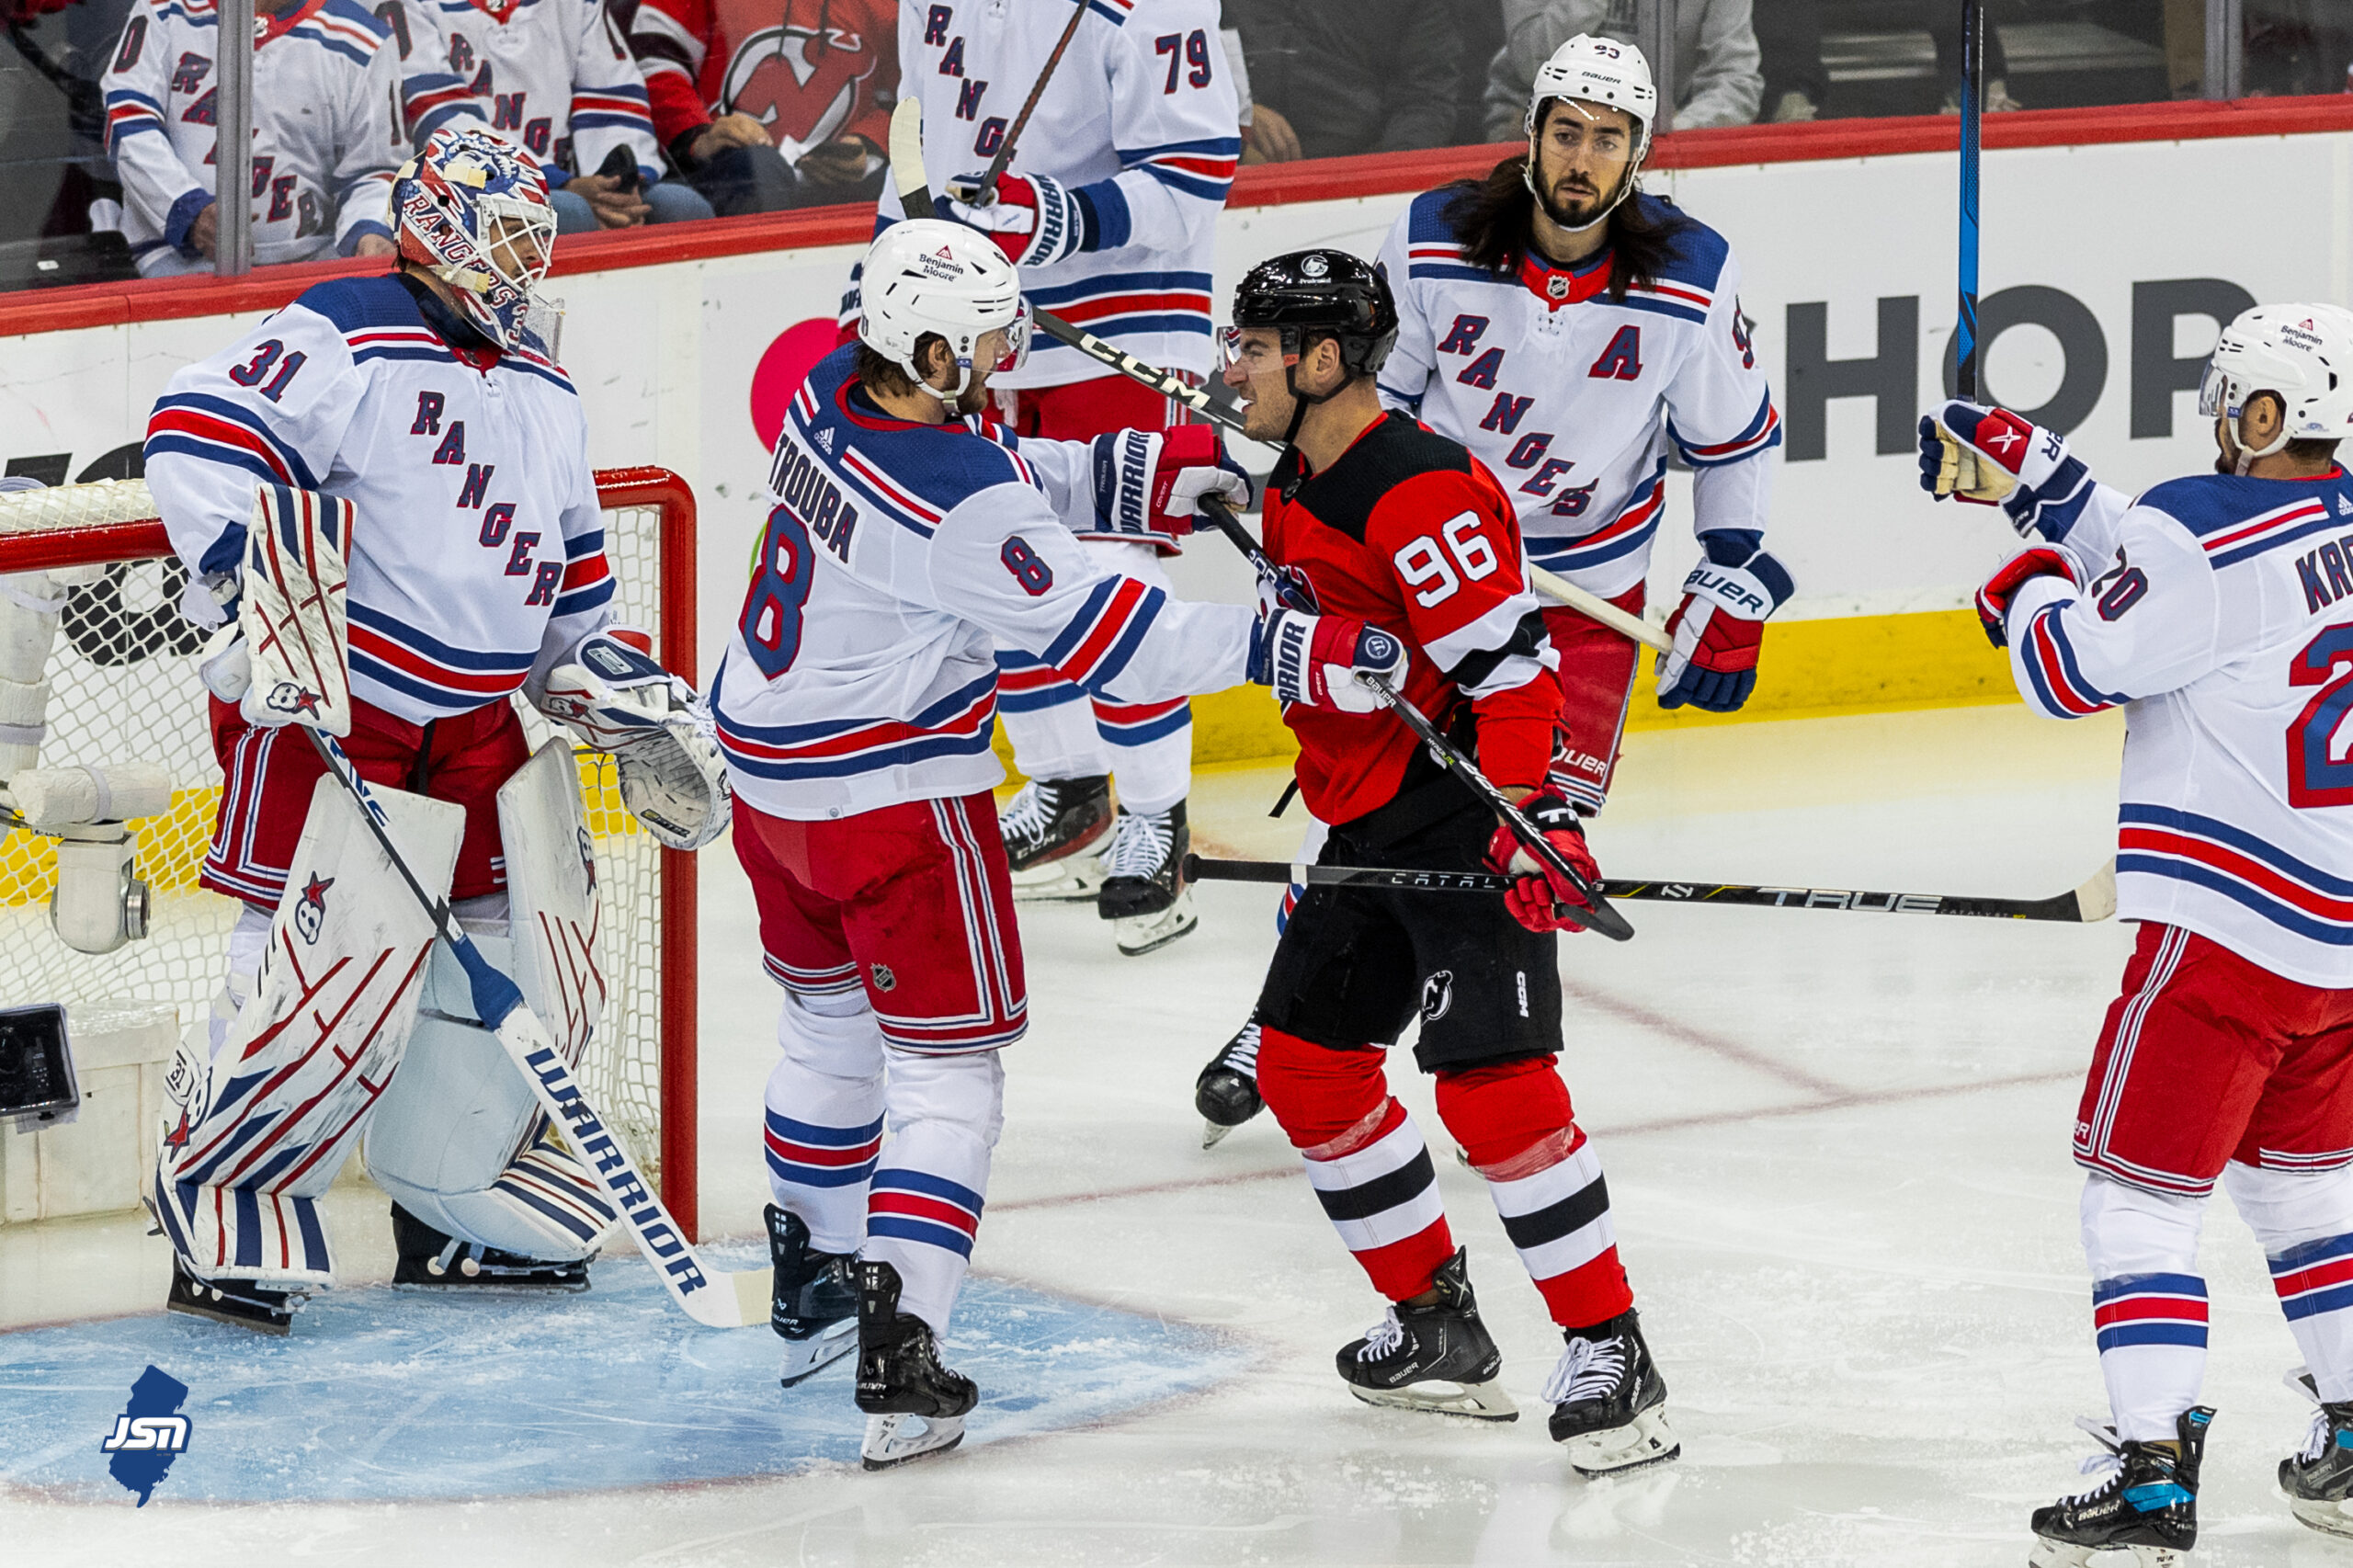 NHL playoffs -- Brodeur, Devils show some fight in Game 4 win over Rangers